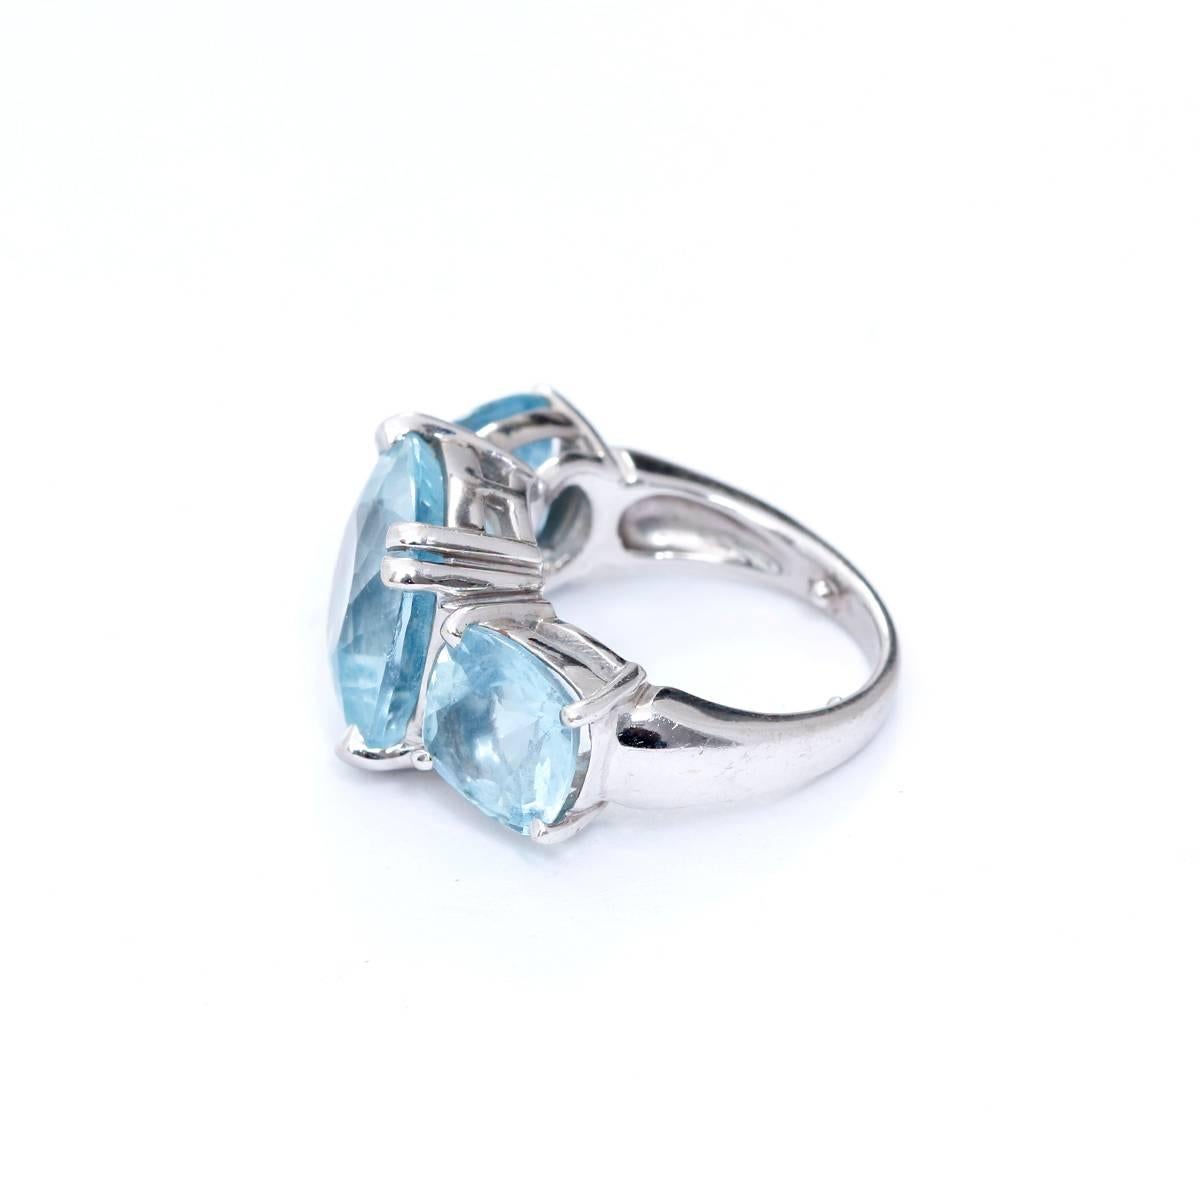 Seaman Schepps Ring Three Stone Ring - . Classic White Gold Three stone Aquamarine Ring .  Hallmarks: Seaman Schepps, 750, copyright, maker's mark, reference numbers. Total weigth is 10 grams.Size 5 